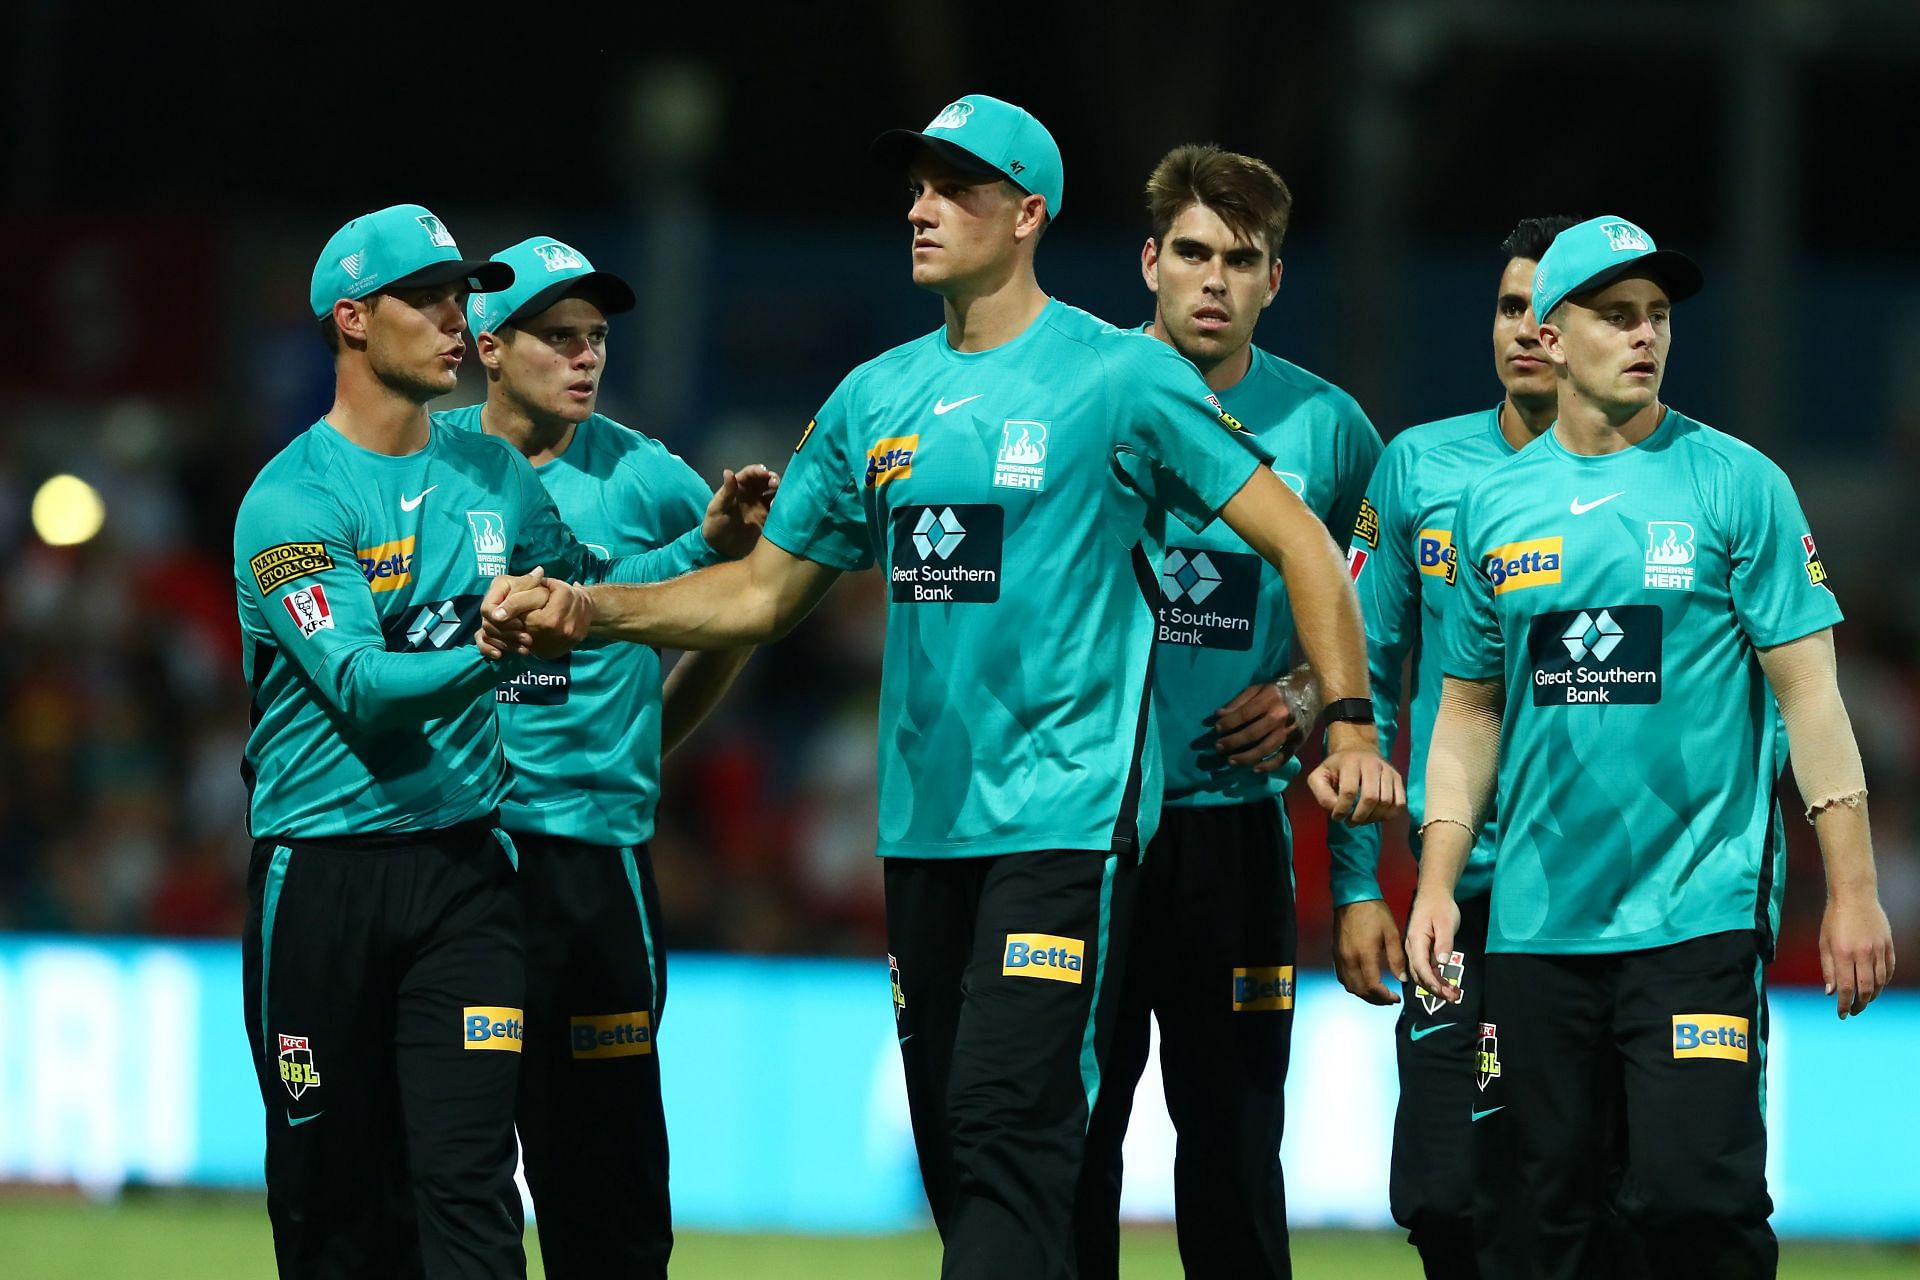 Big Bash League 2021-22, Match 14: Brisbane Heat vs Sydney Thunder - Probable XIs, Match prediction, Weather Forecast, Pitch Report and Live Streaming Details